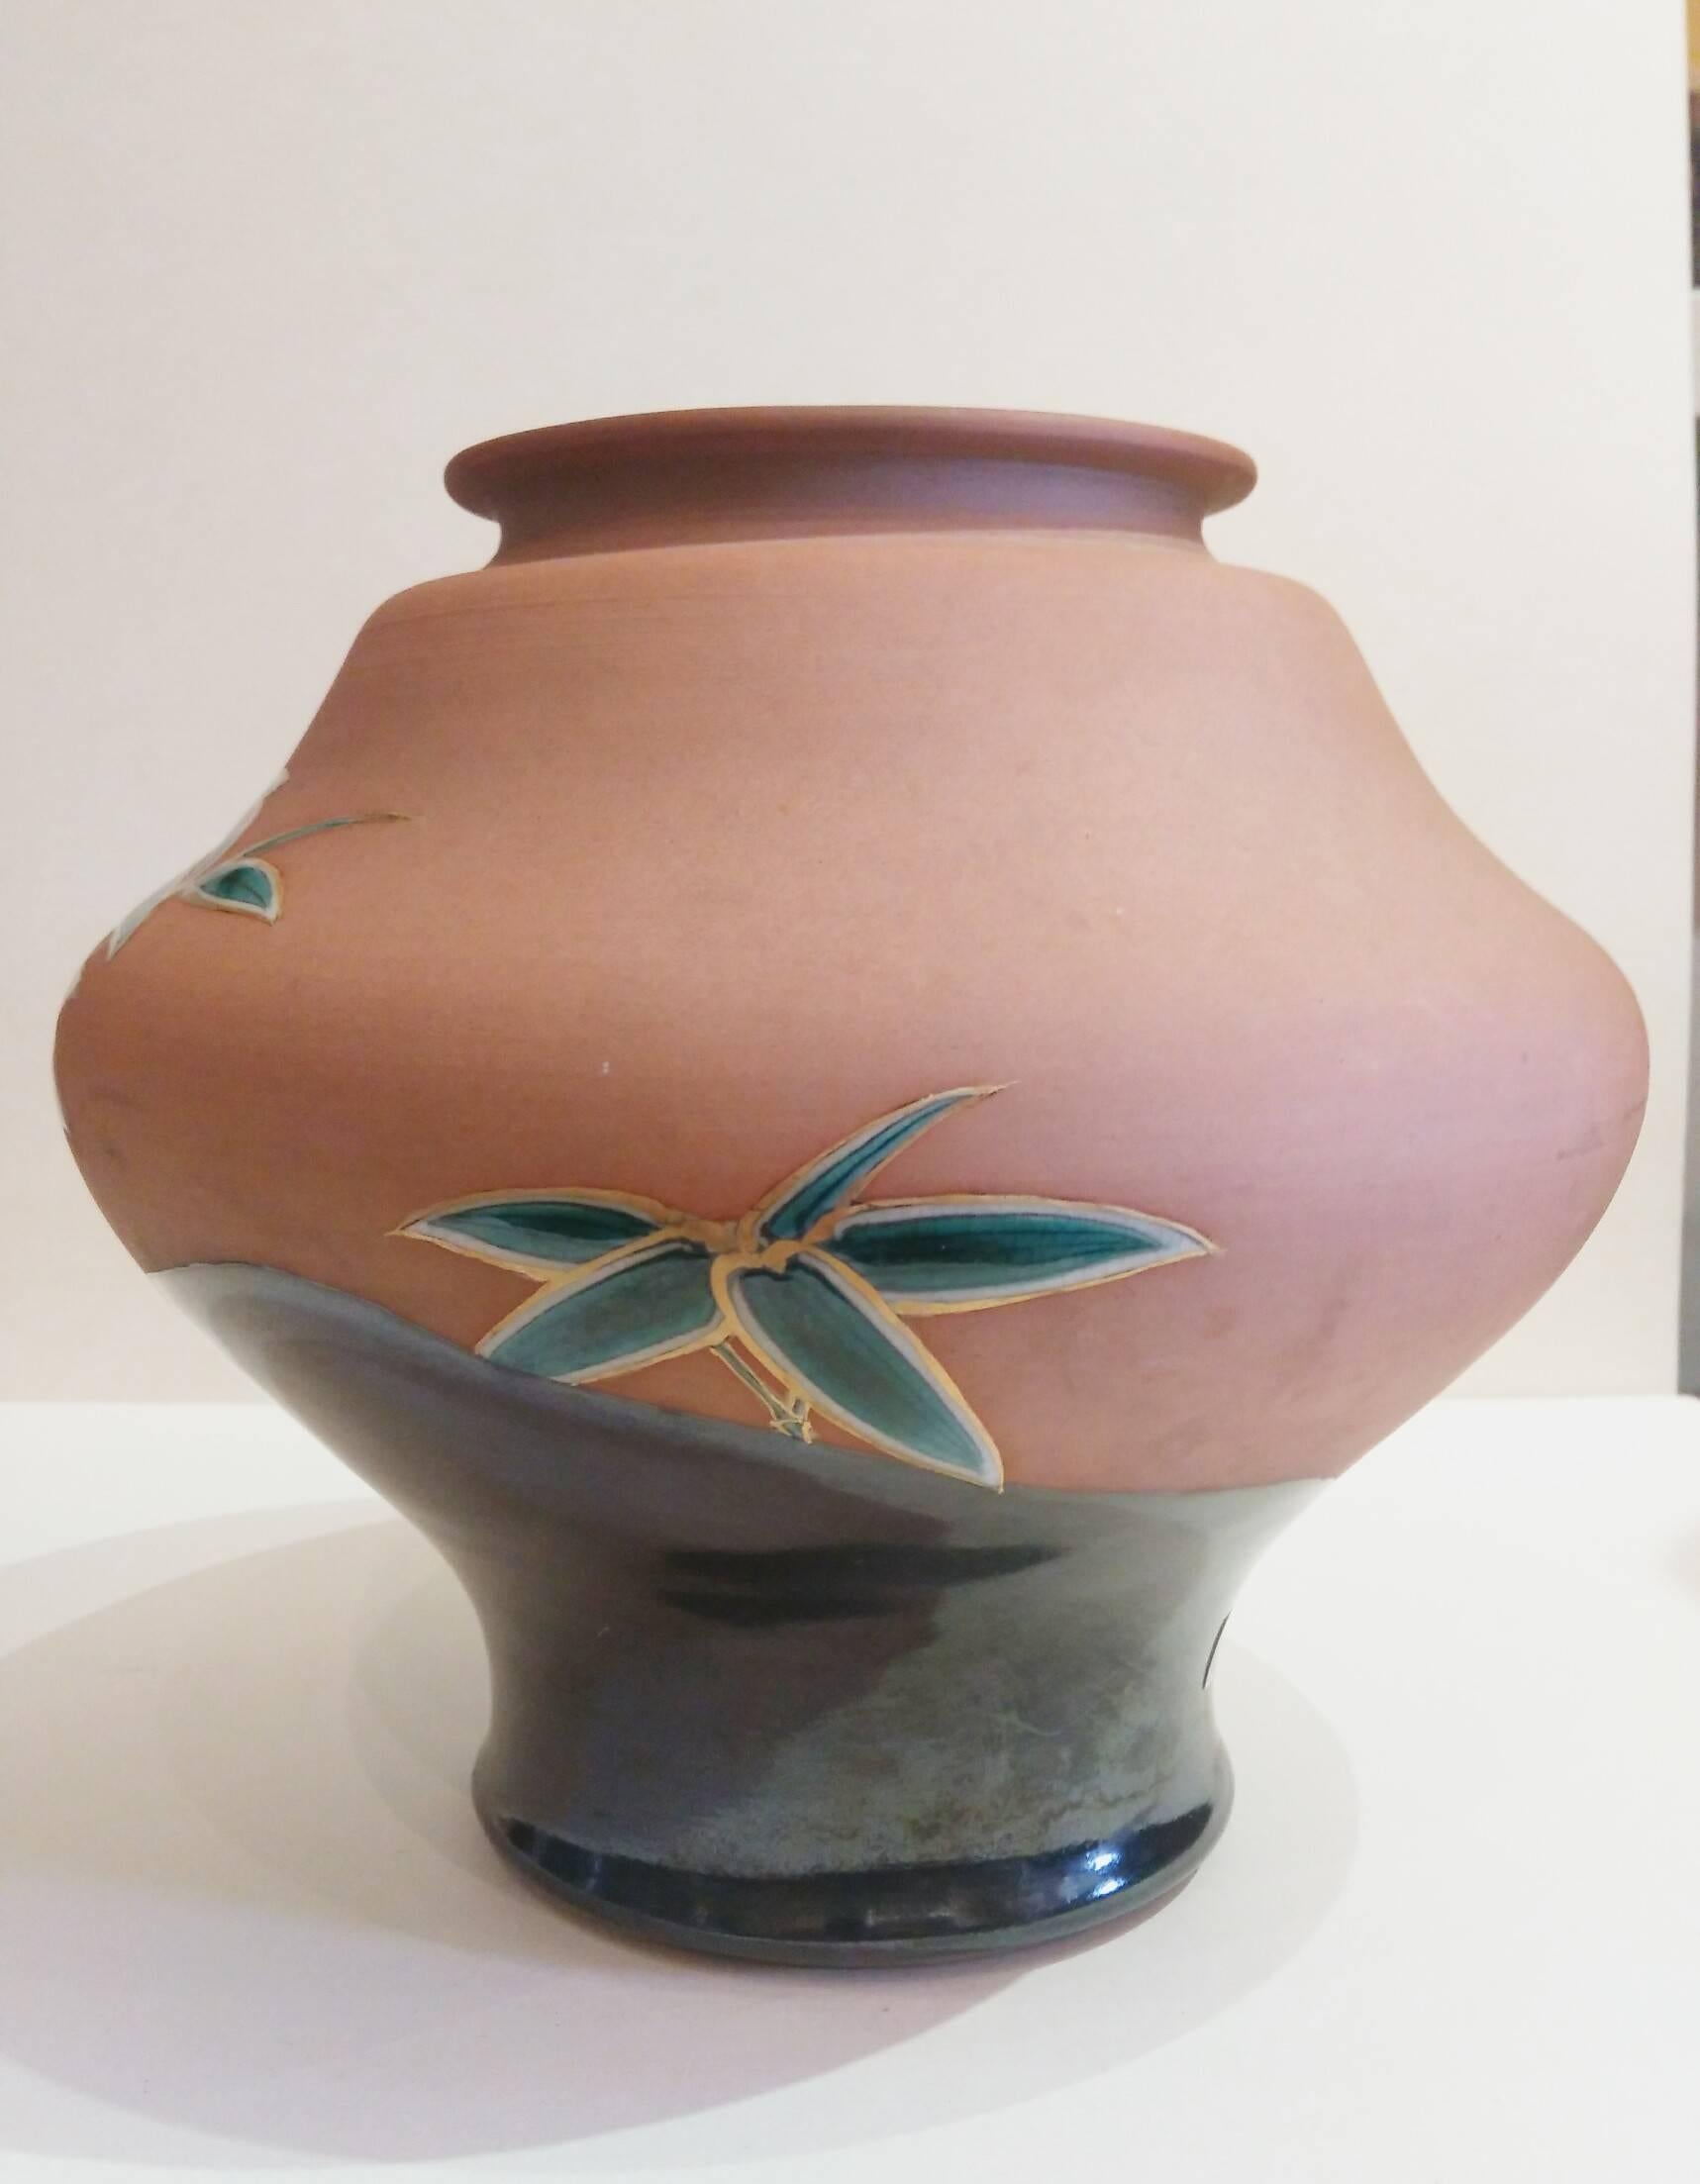 Japanese vase by Makuzu Kozan. Bamboo leaf enamel decorated on biscuit pottery body.
Fitted in original wooden box.